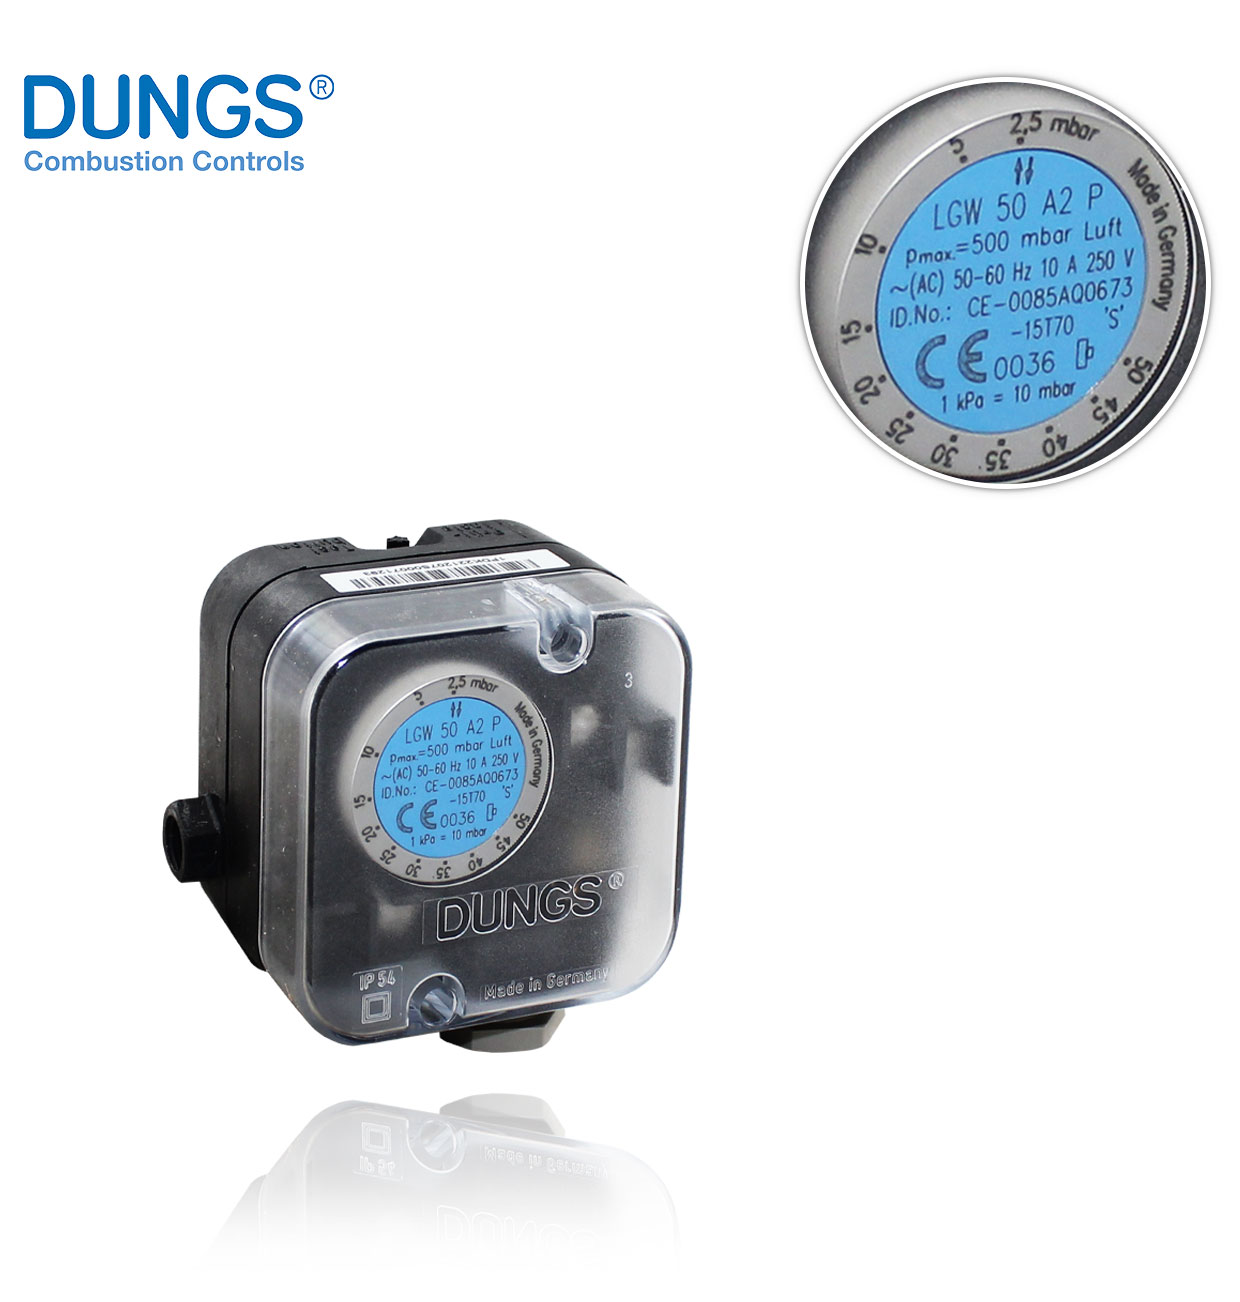 LGW 50 A2P DUNGS TOUCH PRESSURE SWITCH